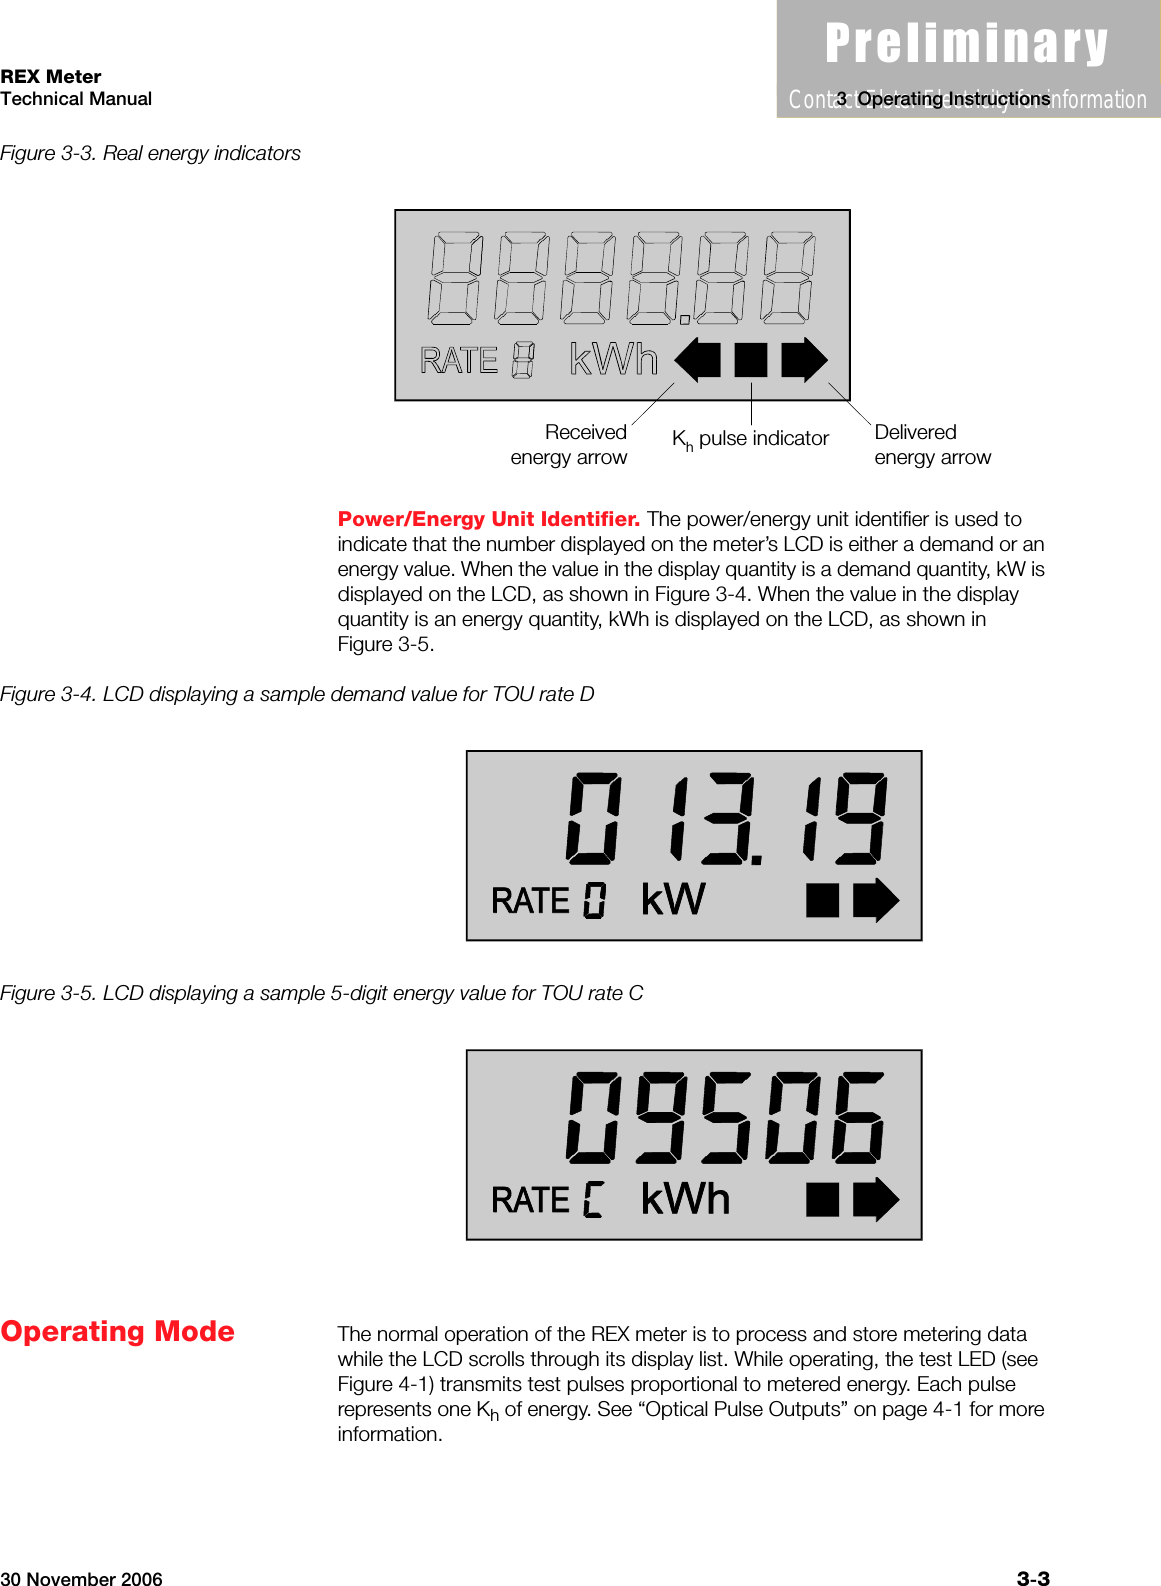 3UHOLPLQDU\Contact Elster Electricity for information30 November 2006 3-3REX MeterTechnical Manual 3  Operating InstructionsFigure 3-3. Real energy indicatorsPower/Energy Unit Identifier. The power/energy unit identifier is used to indicate that the number displayed on the meter’s LCD is either a demand or an energy value. When the value in the display quantity is a demand quantity, kW is displayed on the LCD, as shown in Figure 3-4. When the value in the display quantity is an energy quantity, kWh is displayed on the LCD, as shown in Figure 3-5.Figure 3-4. LCD displaying a sample demand value for TOU rate DFigure 3-5. LCD displaying a sample 5-digit energy value for TOU rate COperating Mode The normal operation of the REX meter is to process and store metering data while the LCD scrolls through its display list. While operating, the test LED (see Figure 4-1) transmits test pulses proportional to metered energy. Each pulse represents one Kh of energy. See “Optical Pulse Outputs” on page 4-1 for more information.Receivedenergy arrowDeliveredenergy arrowKh pulse indicator